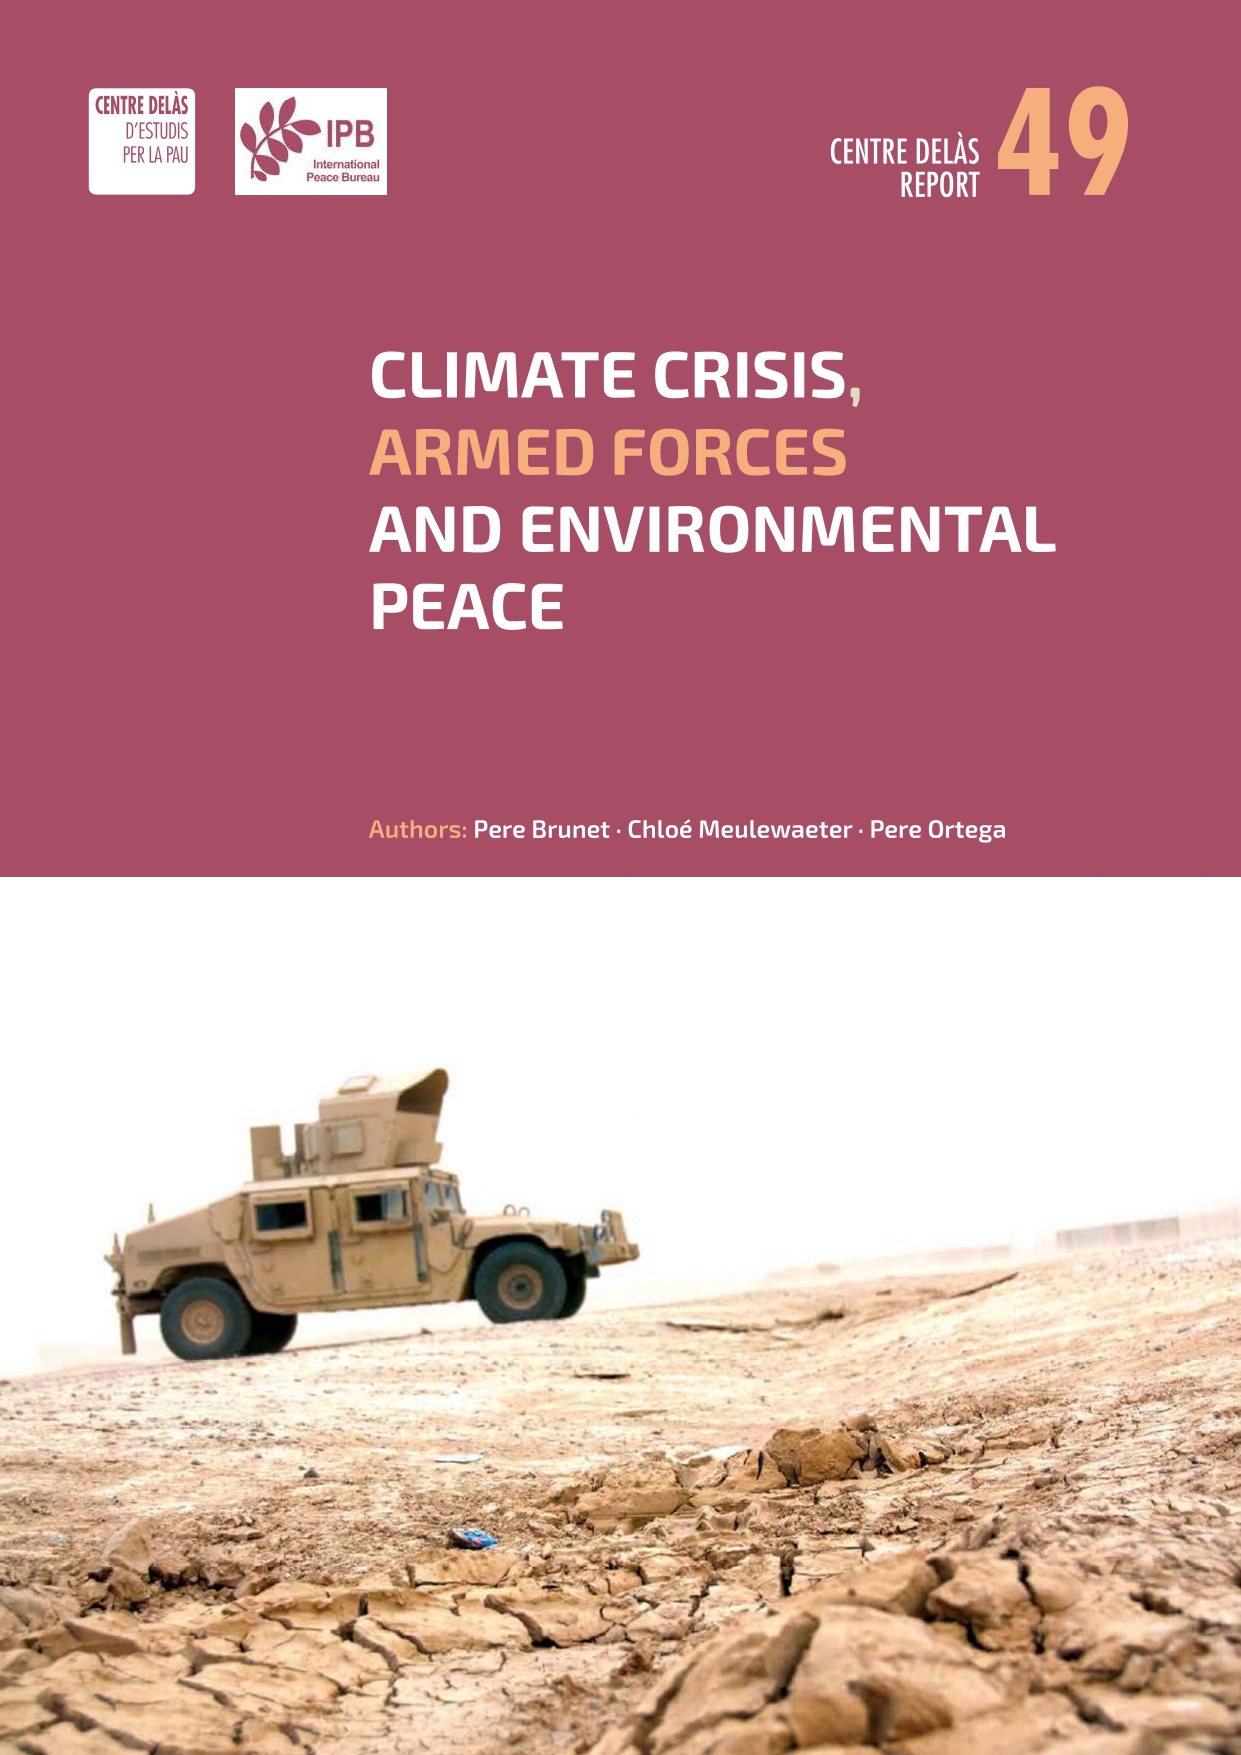 Report 49: “Climate crisis, armed forces and environmental peace”